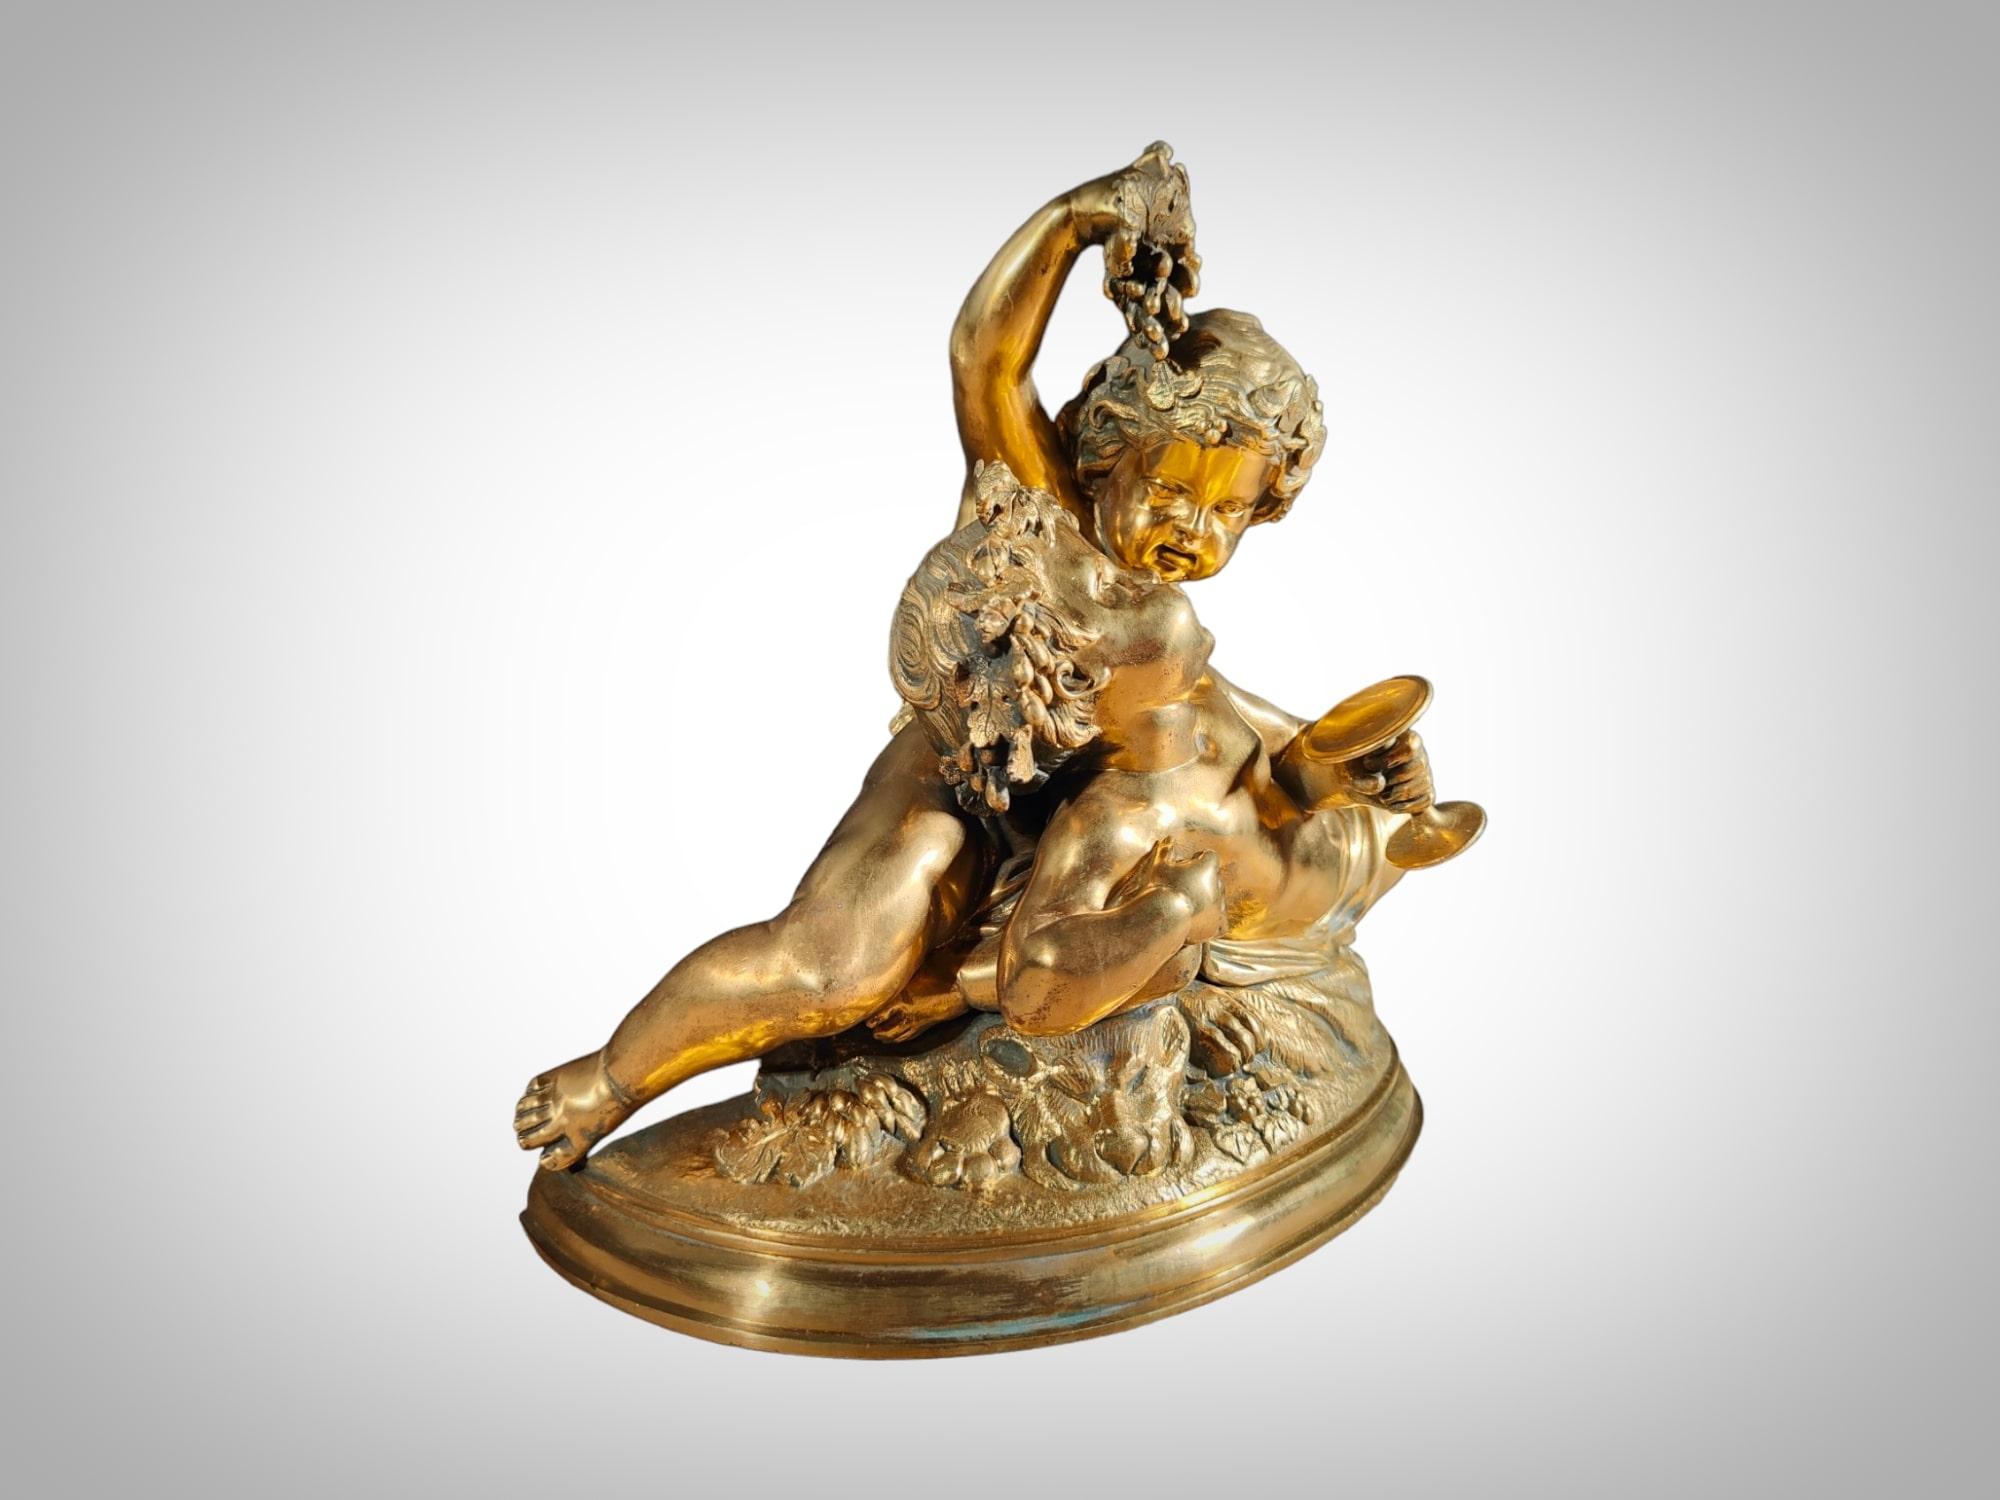 Immerse yourself in the elegance of the 19th century with this refined gilded bronze sculpture depicting the allegory of the harvest. The piece features two children enjoying grapes, capturing the essence of art and life from that era. In excellent